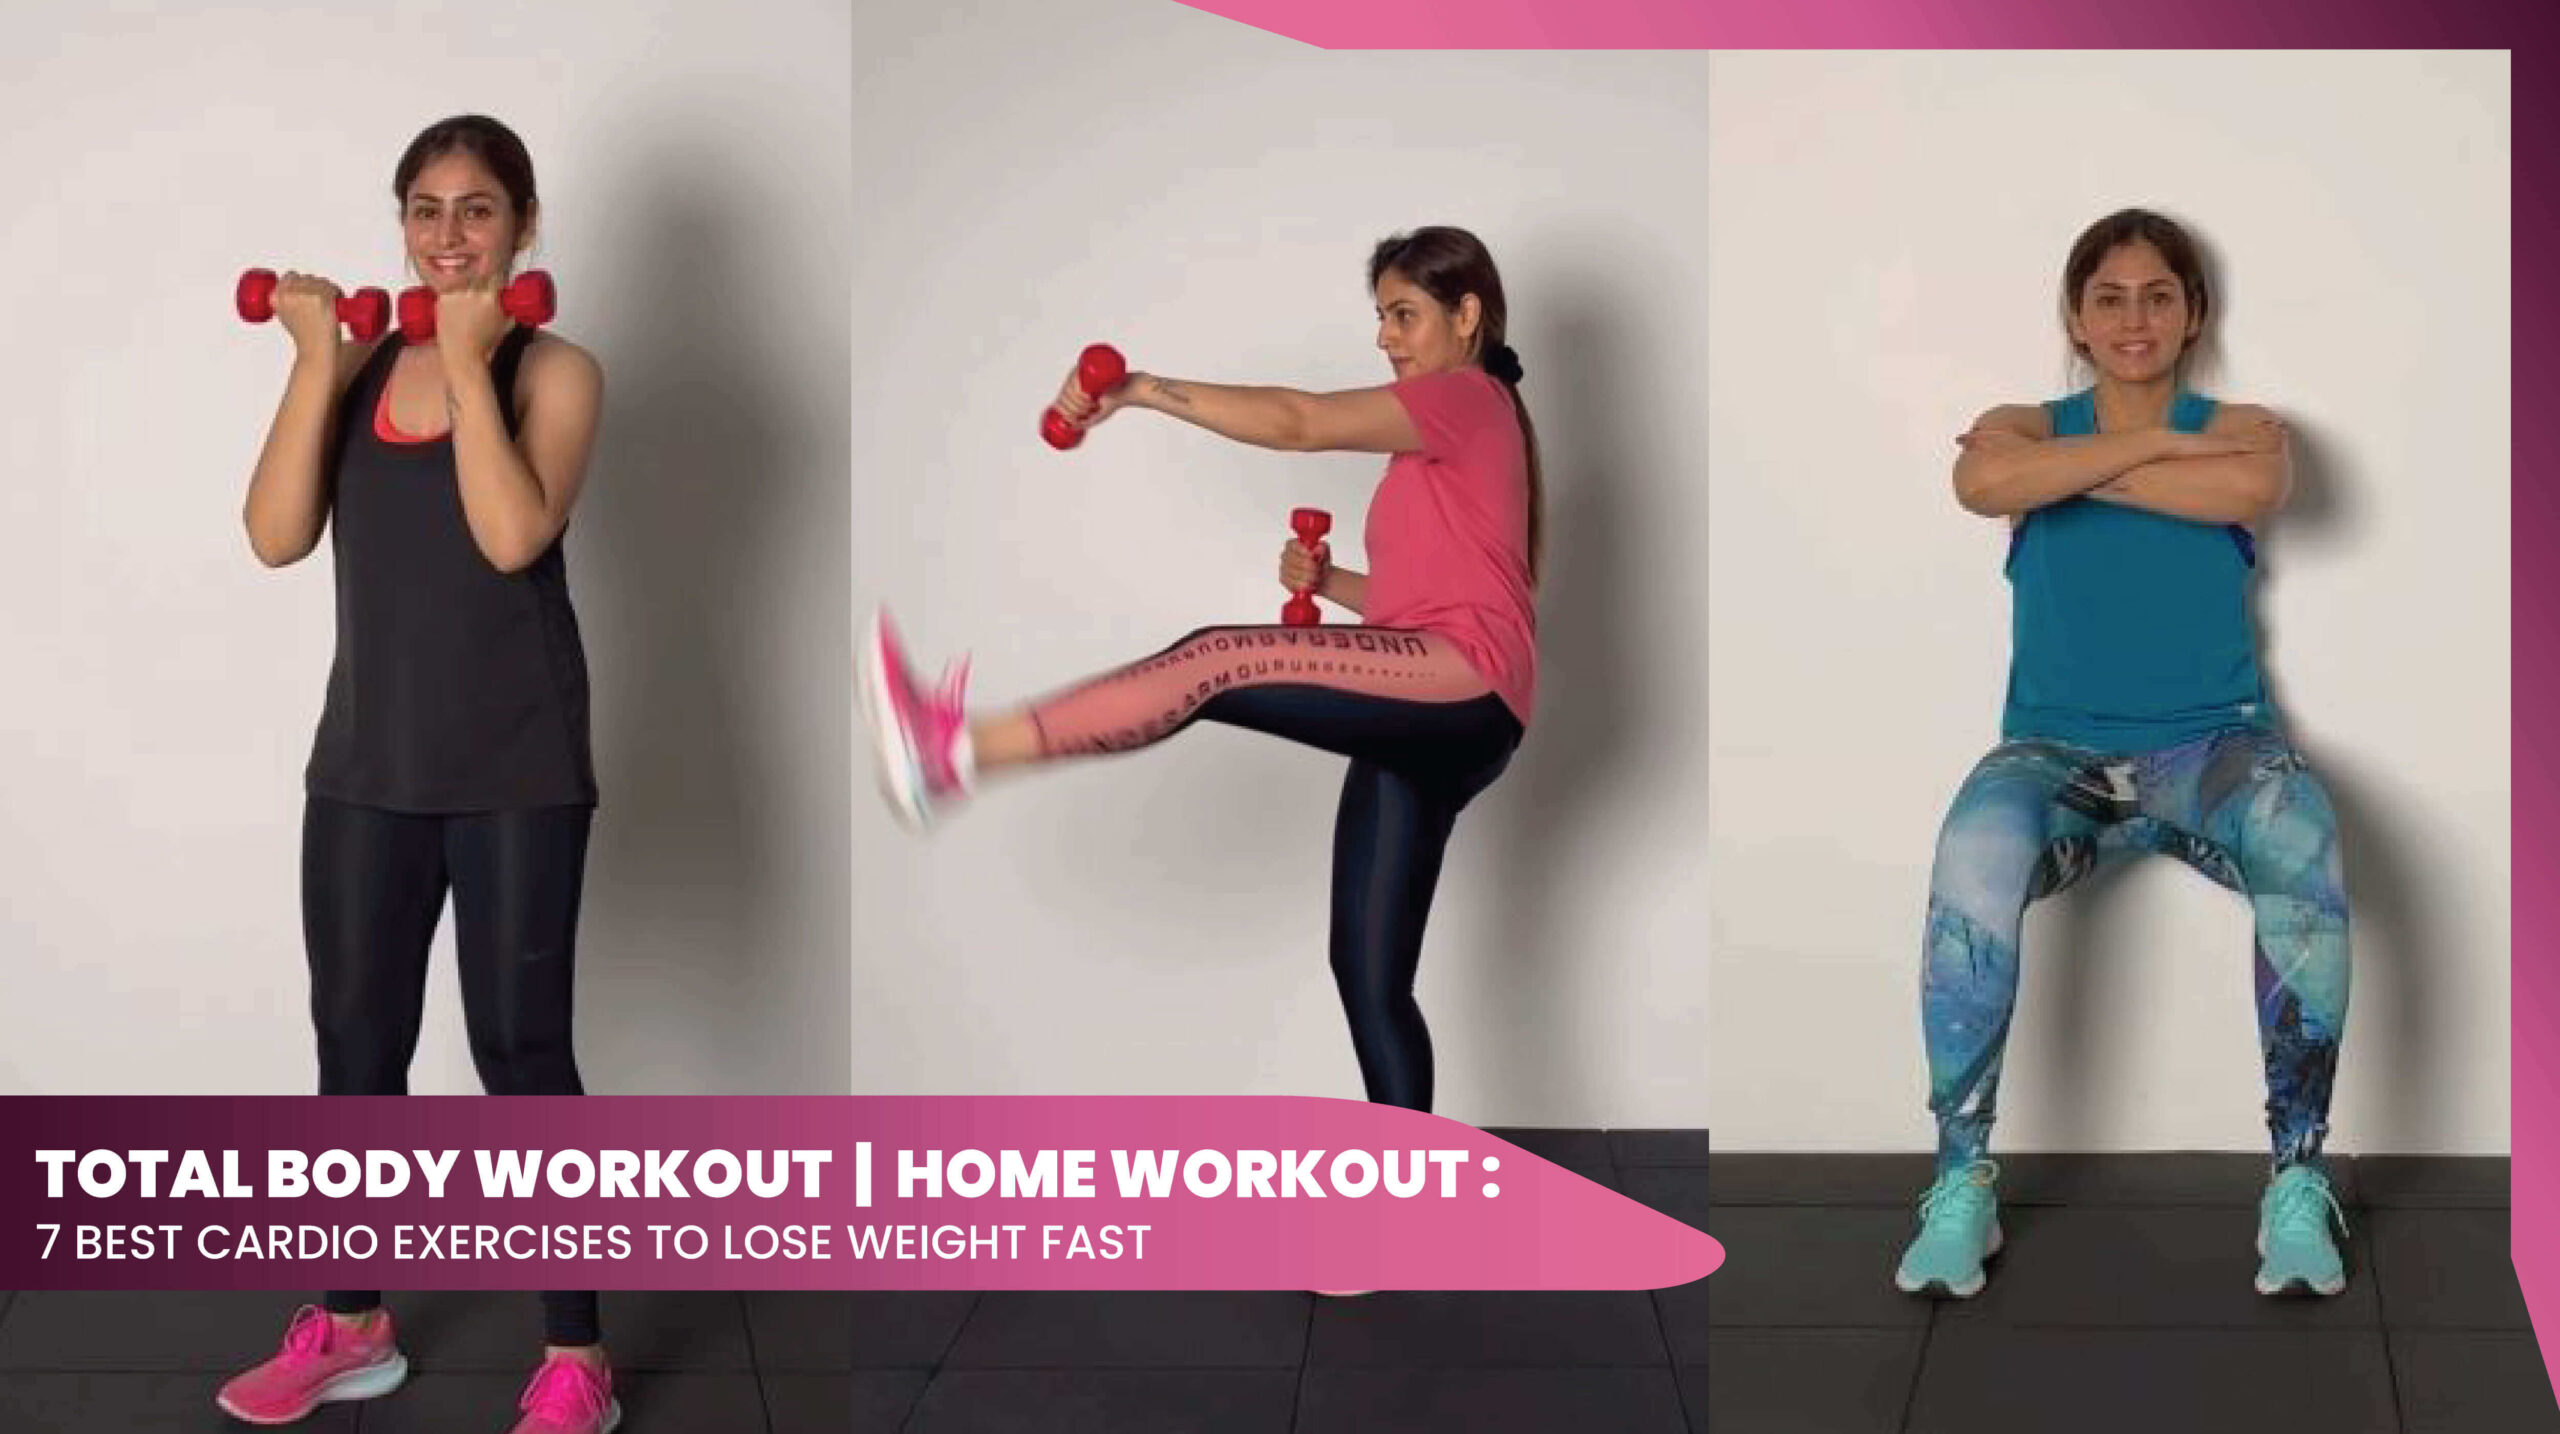 11total body workout at home with cardio exercises and HIIT training